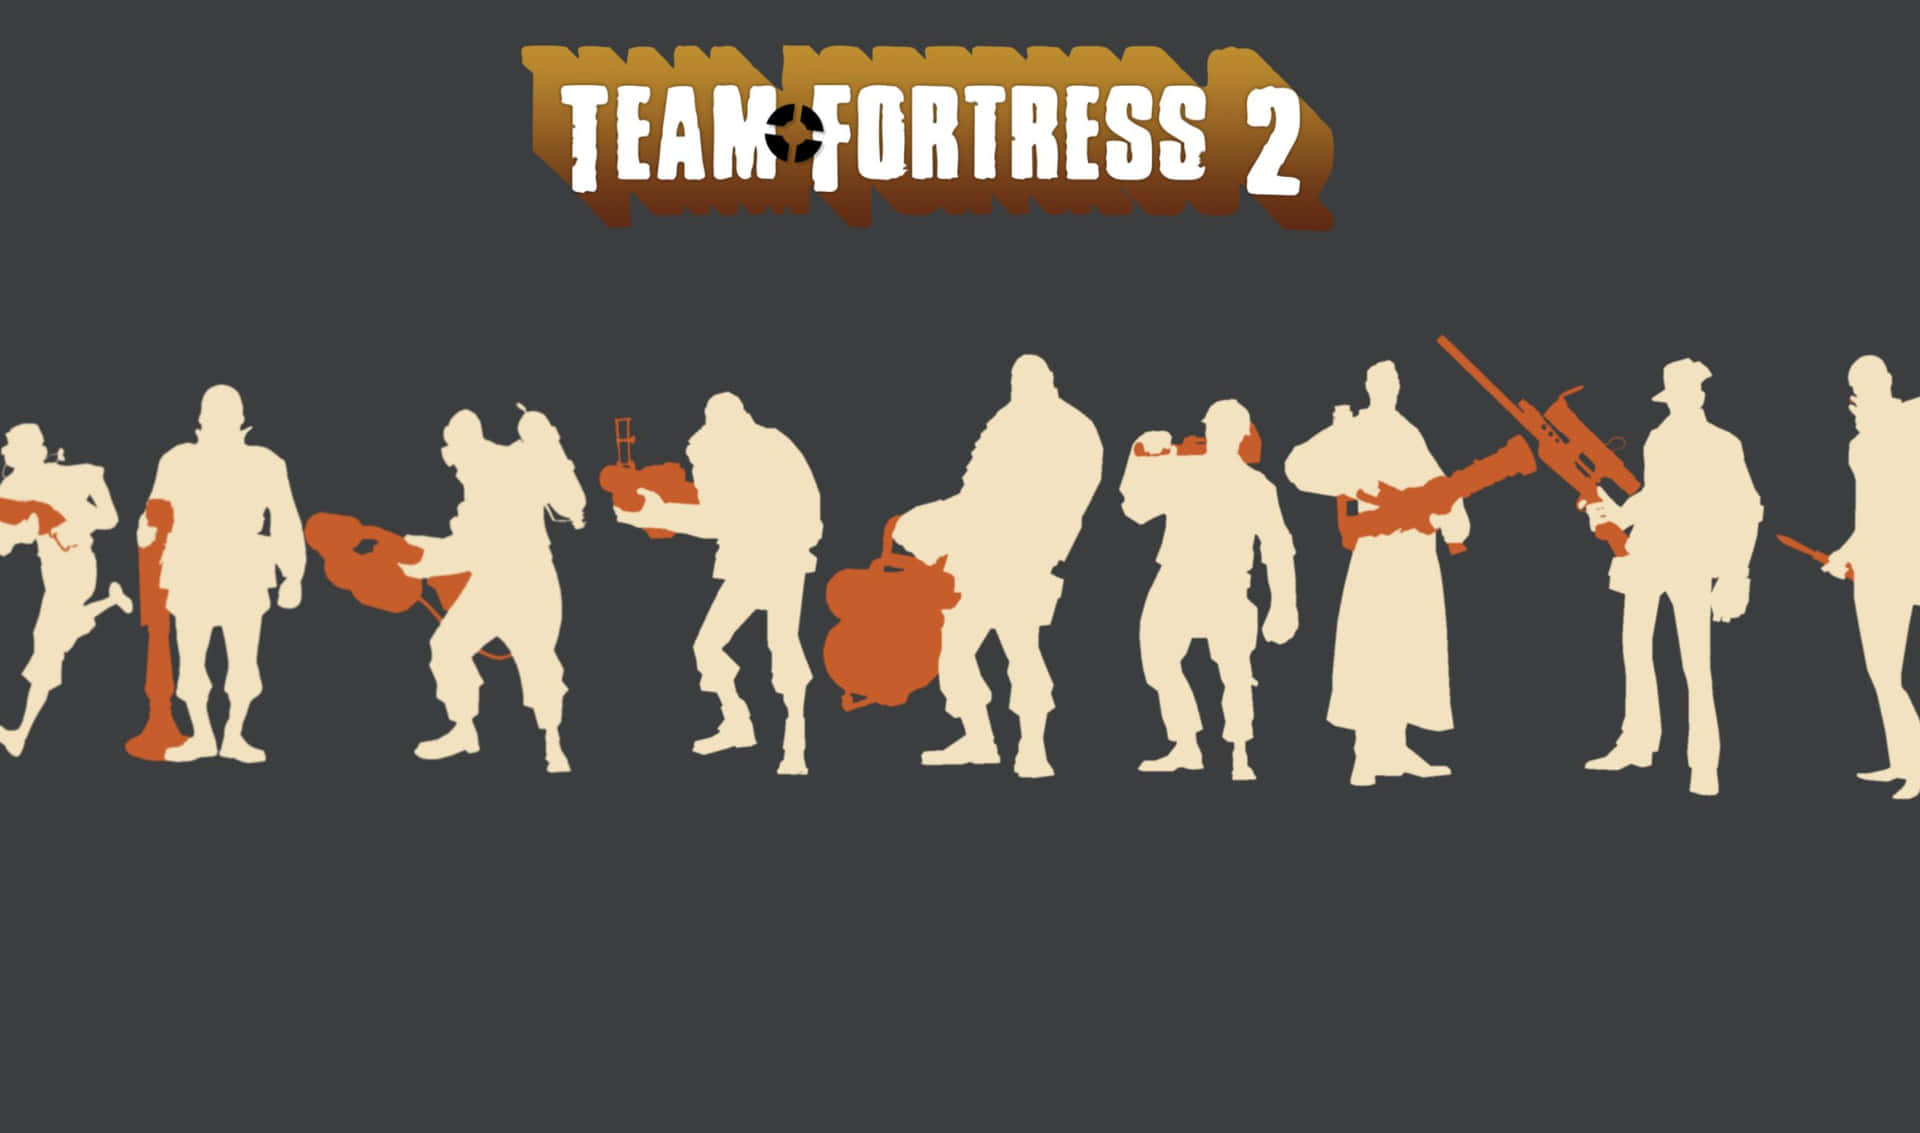 A Group Of People With Guns And A Banner That Says Team Fortress 2